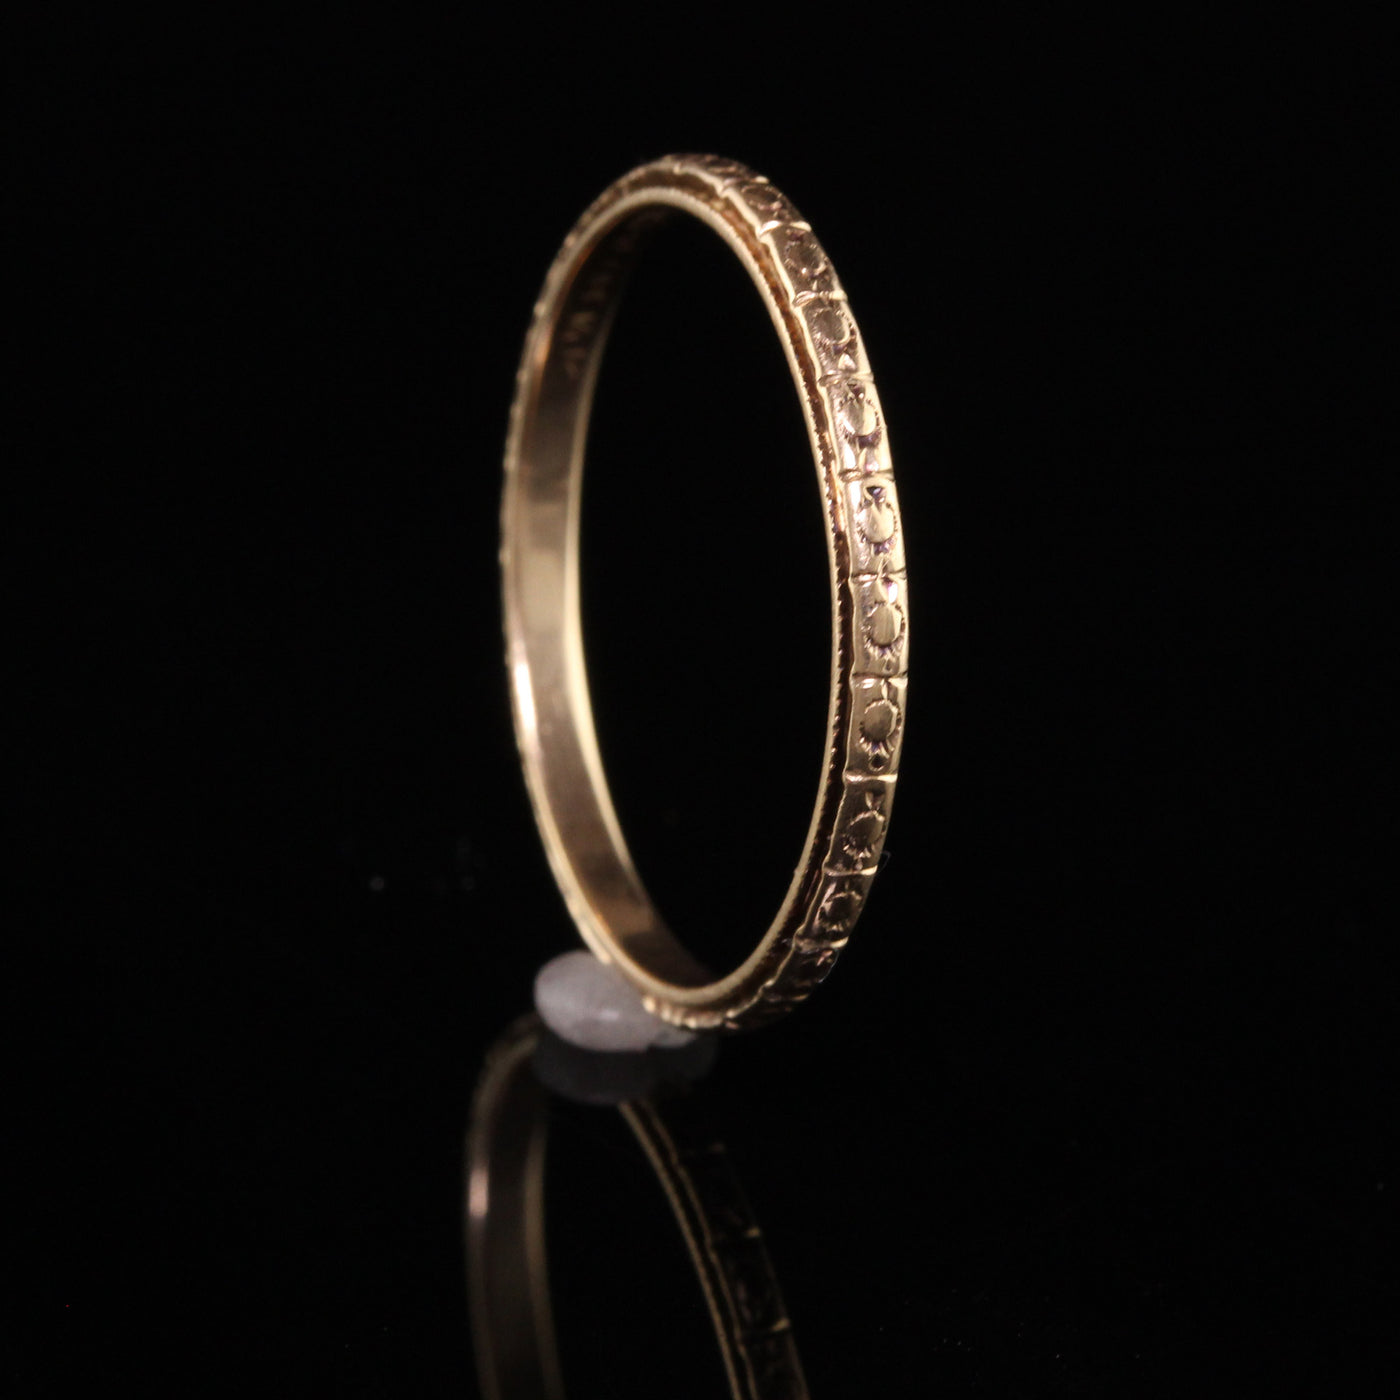 Antique Art Deco 14K Yellow Gold Engraved Wedding Band - Size 10 1/2